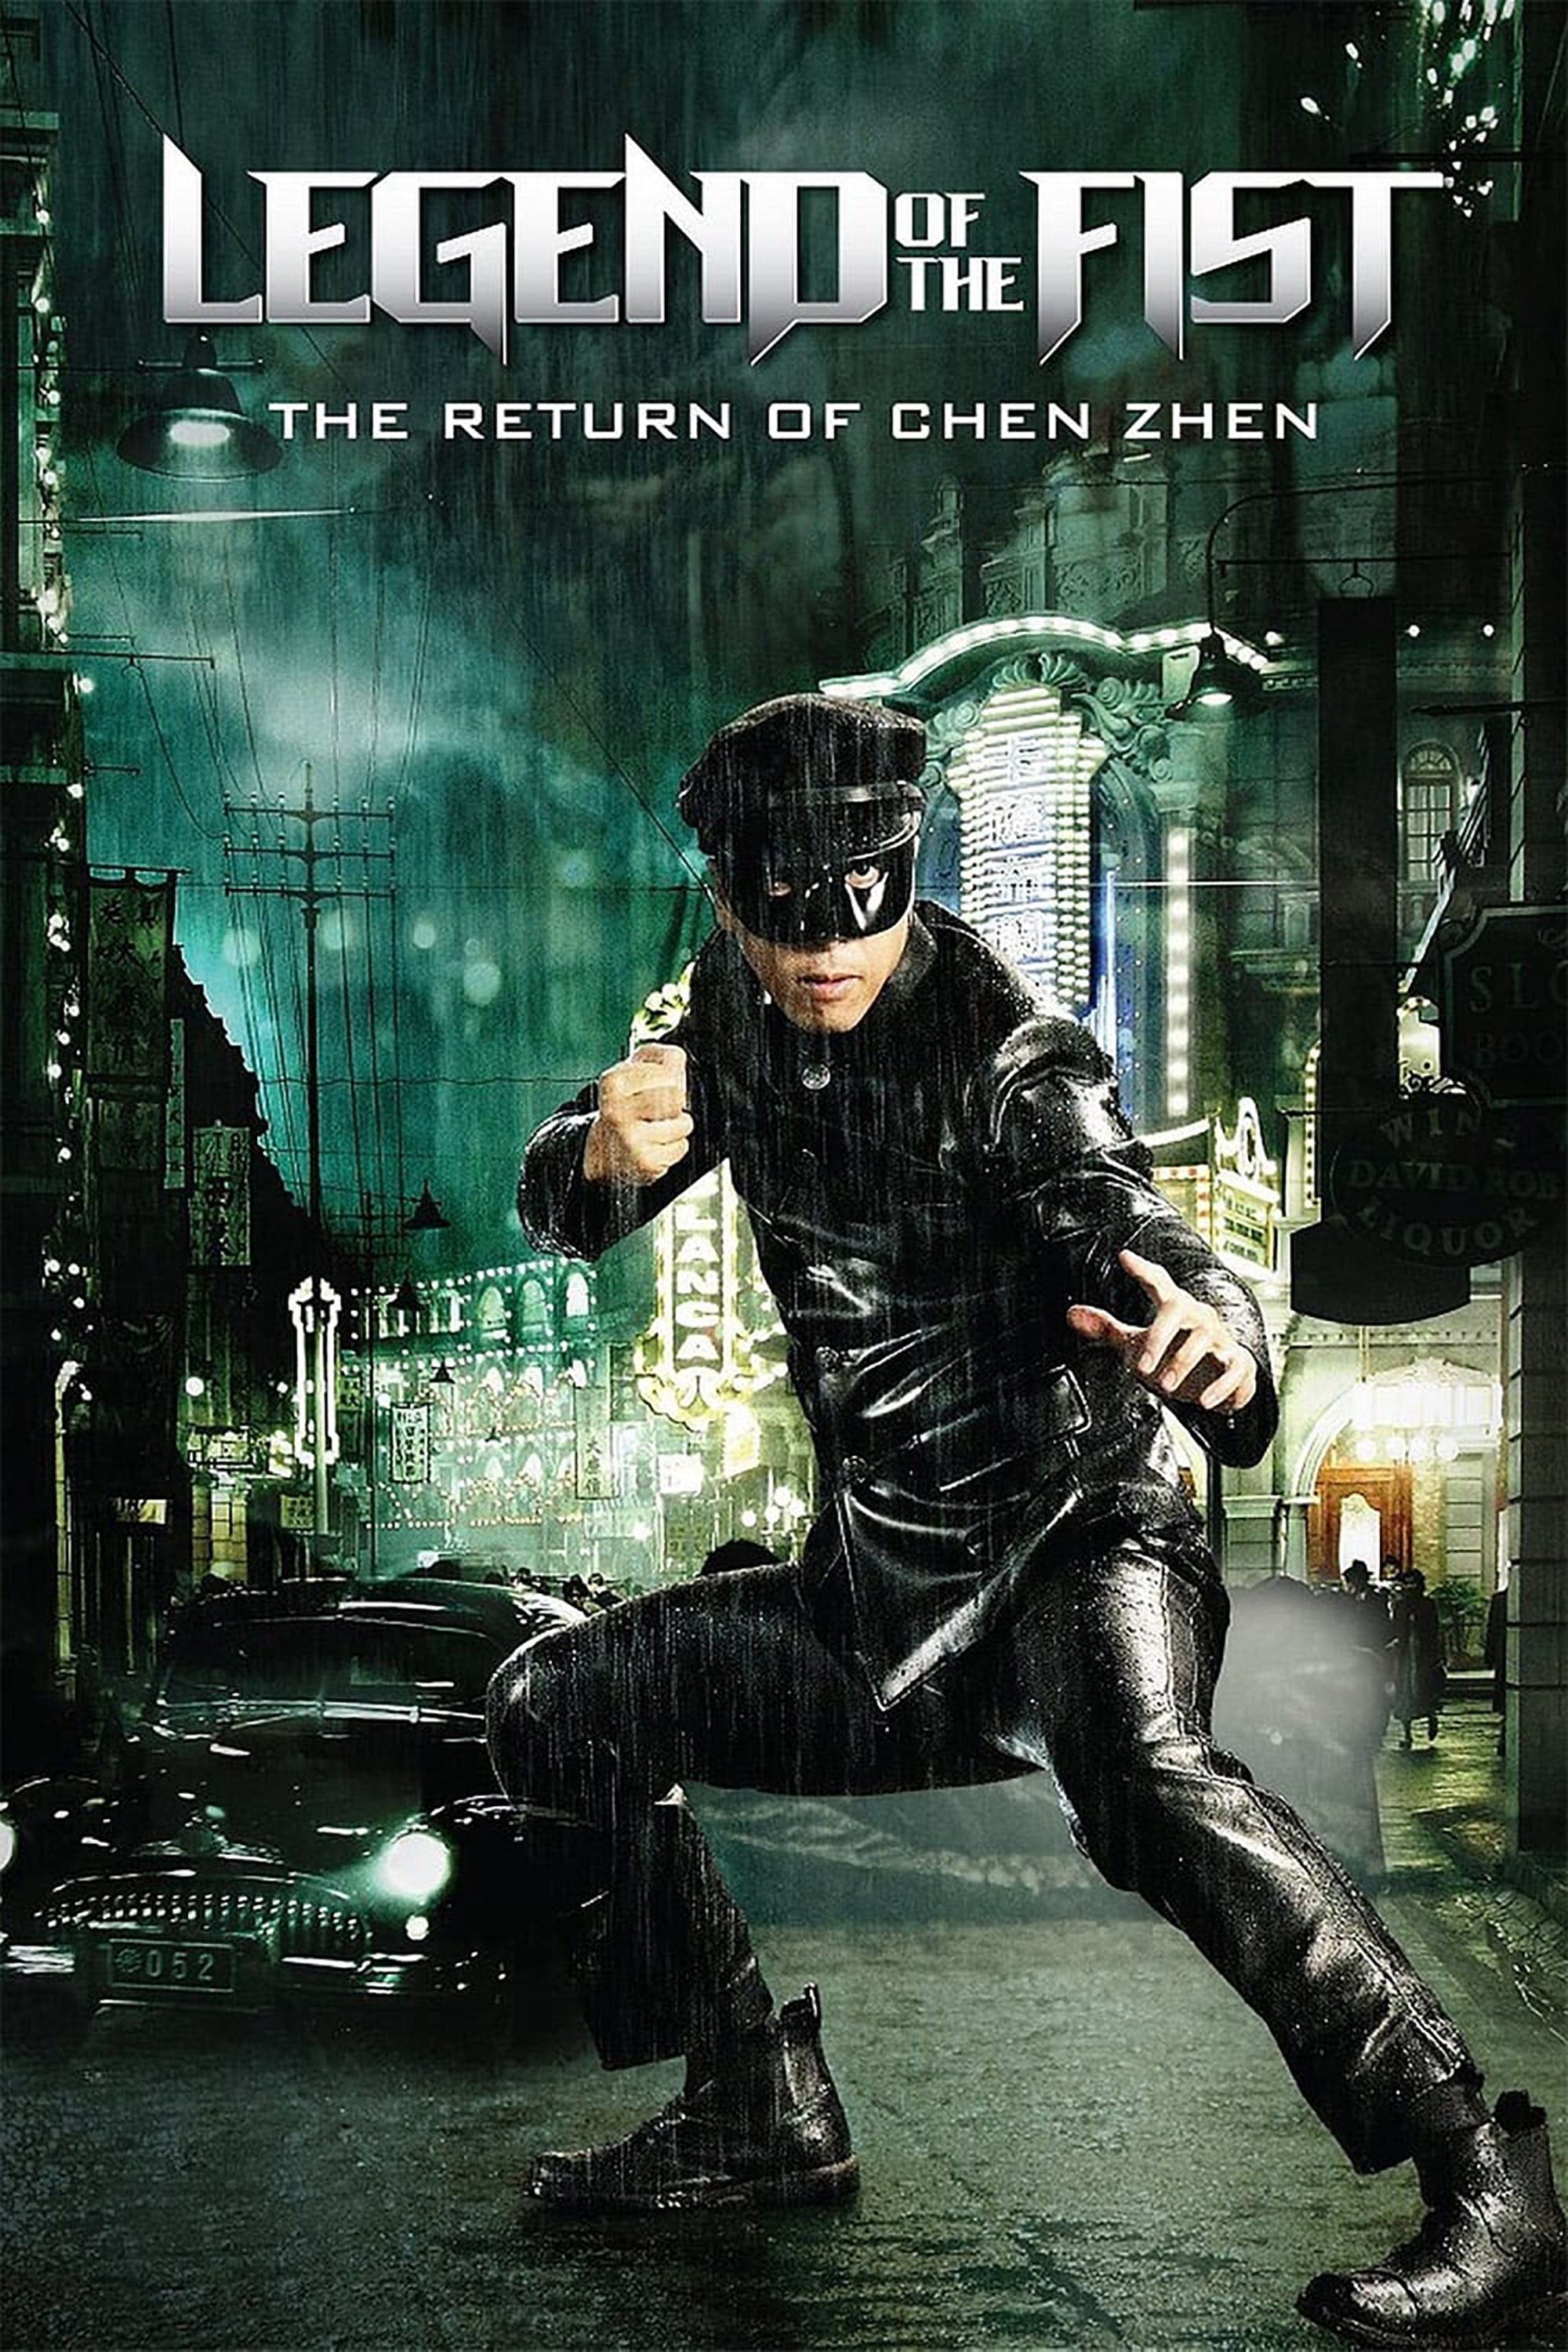 Xem Phim Legend of the Fist: The Return of Chen Zhen (Legend of the Fist: The Return of Chen Zhen)